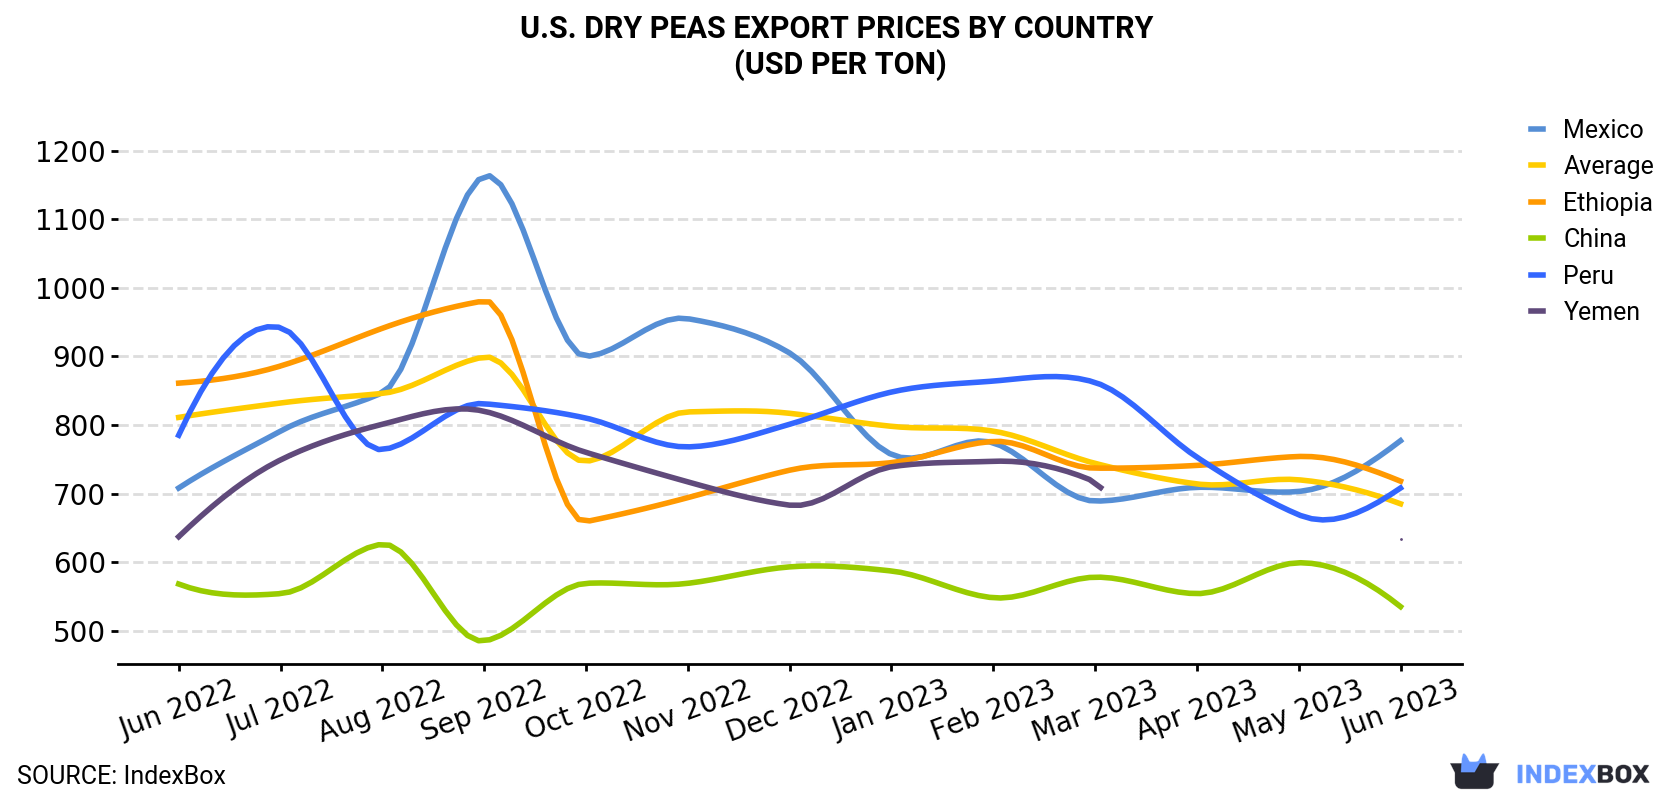 U.S. Dry Peas Export Prices By Country (USD Per Ton)